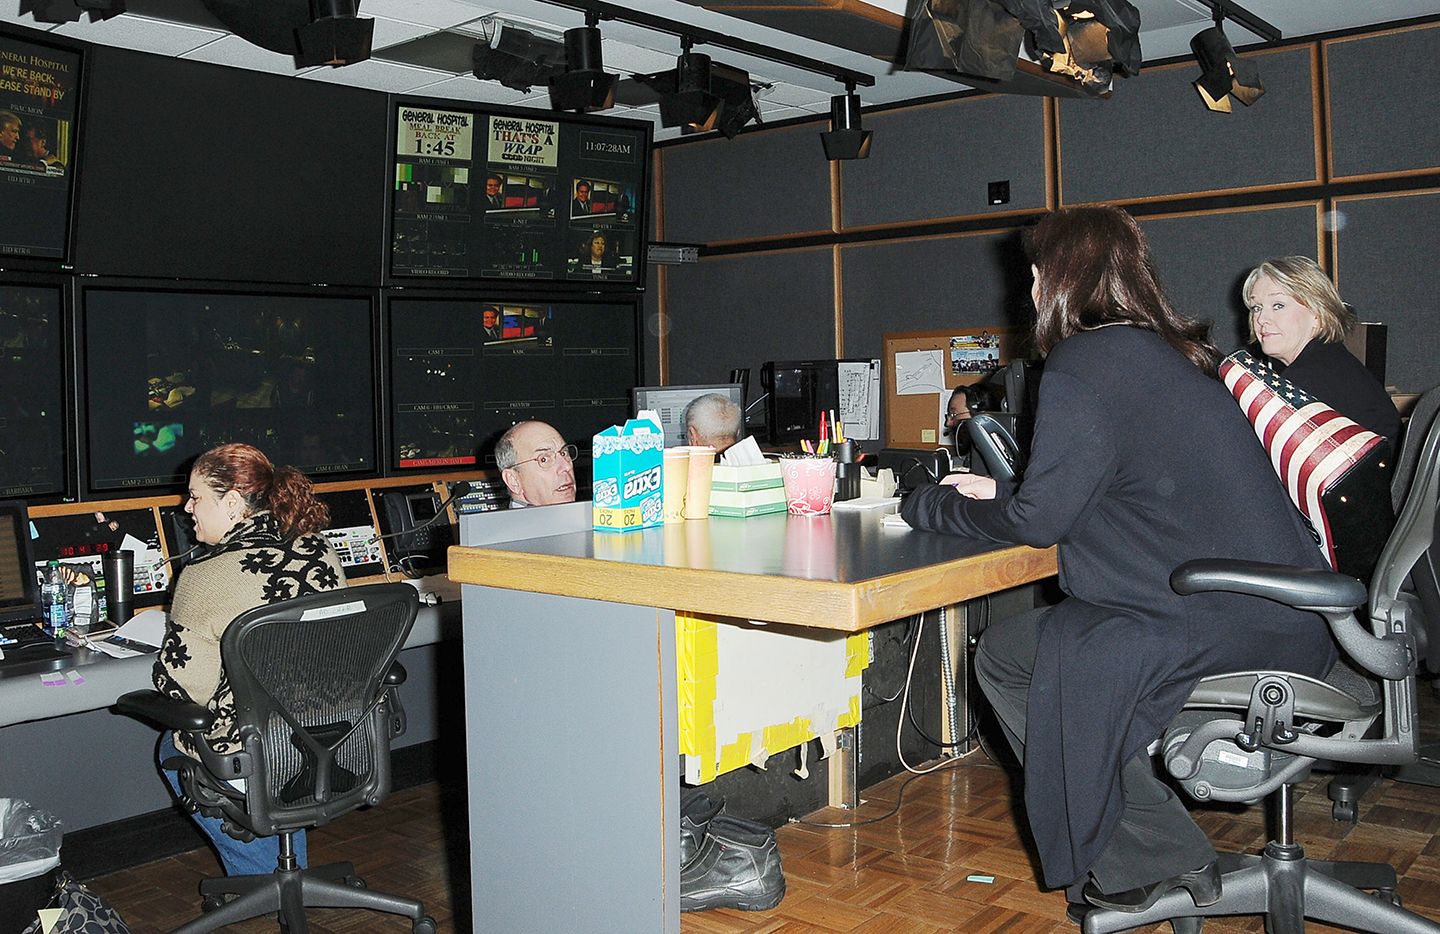 The crew goes to work on the General Hospital set